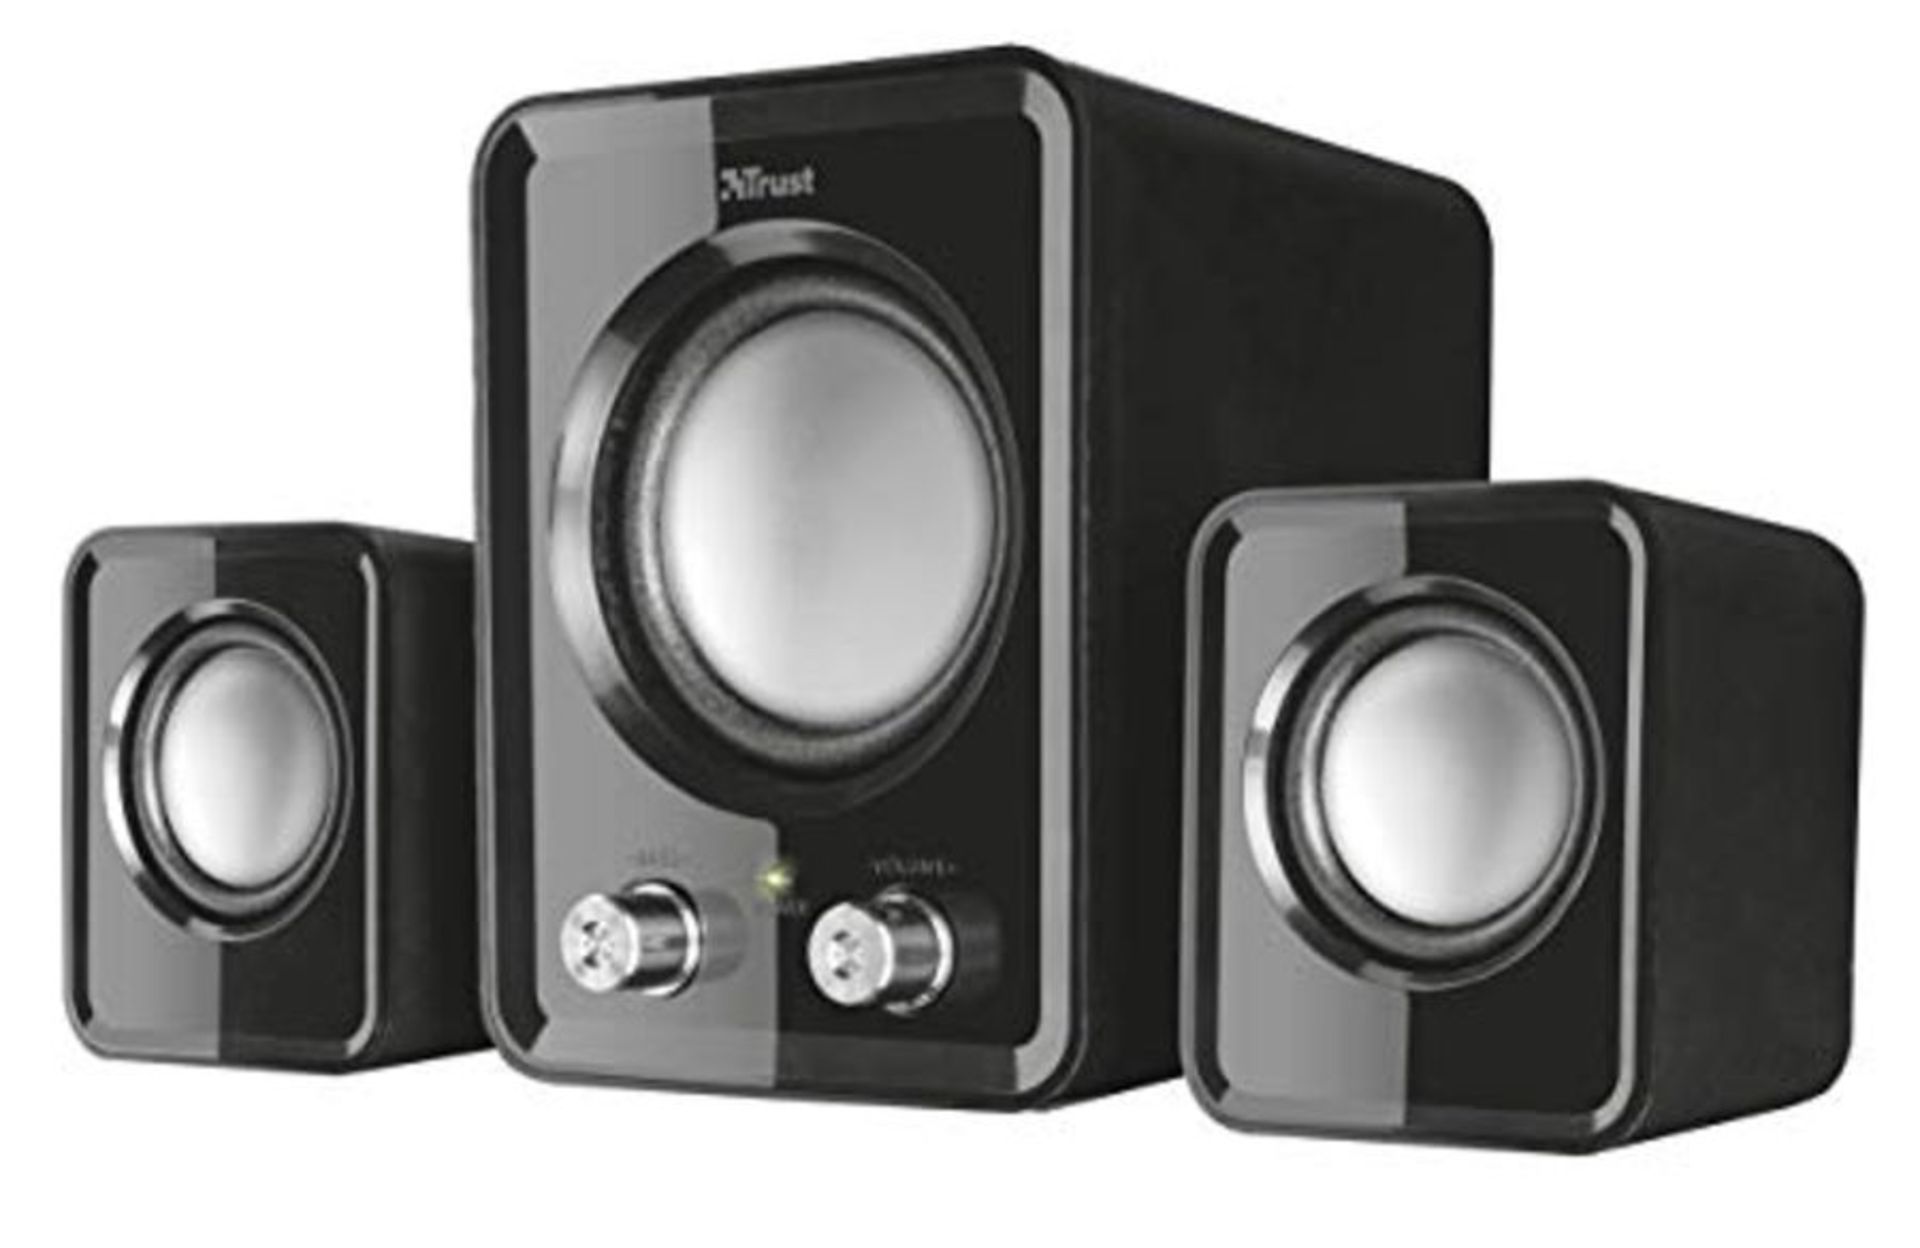 Trust 21525 Ziva Compact 2.1 PC Speakers with Subwoofer for Computer and Laptop, 12 W,